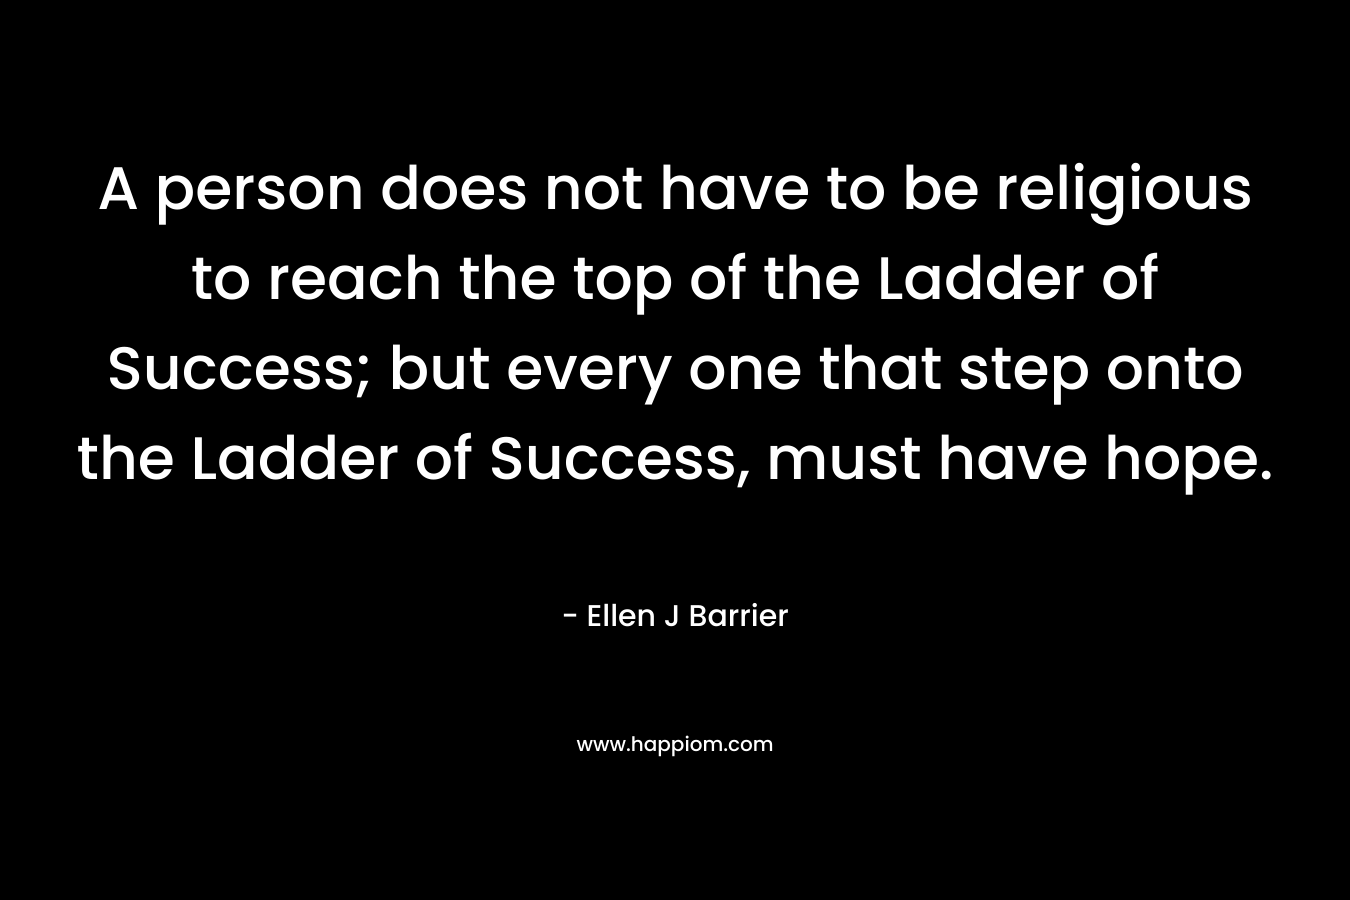 A person does not have to be religious to reach the top of the Ladder of Success; but every one that step onto the Ladder of Success, must have hope.